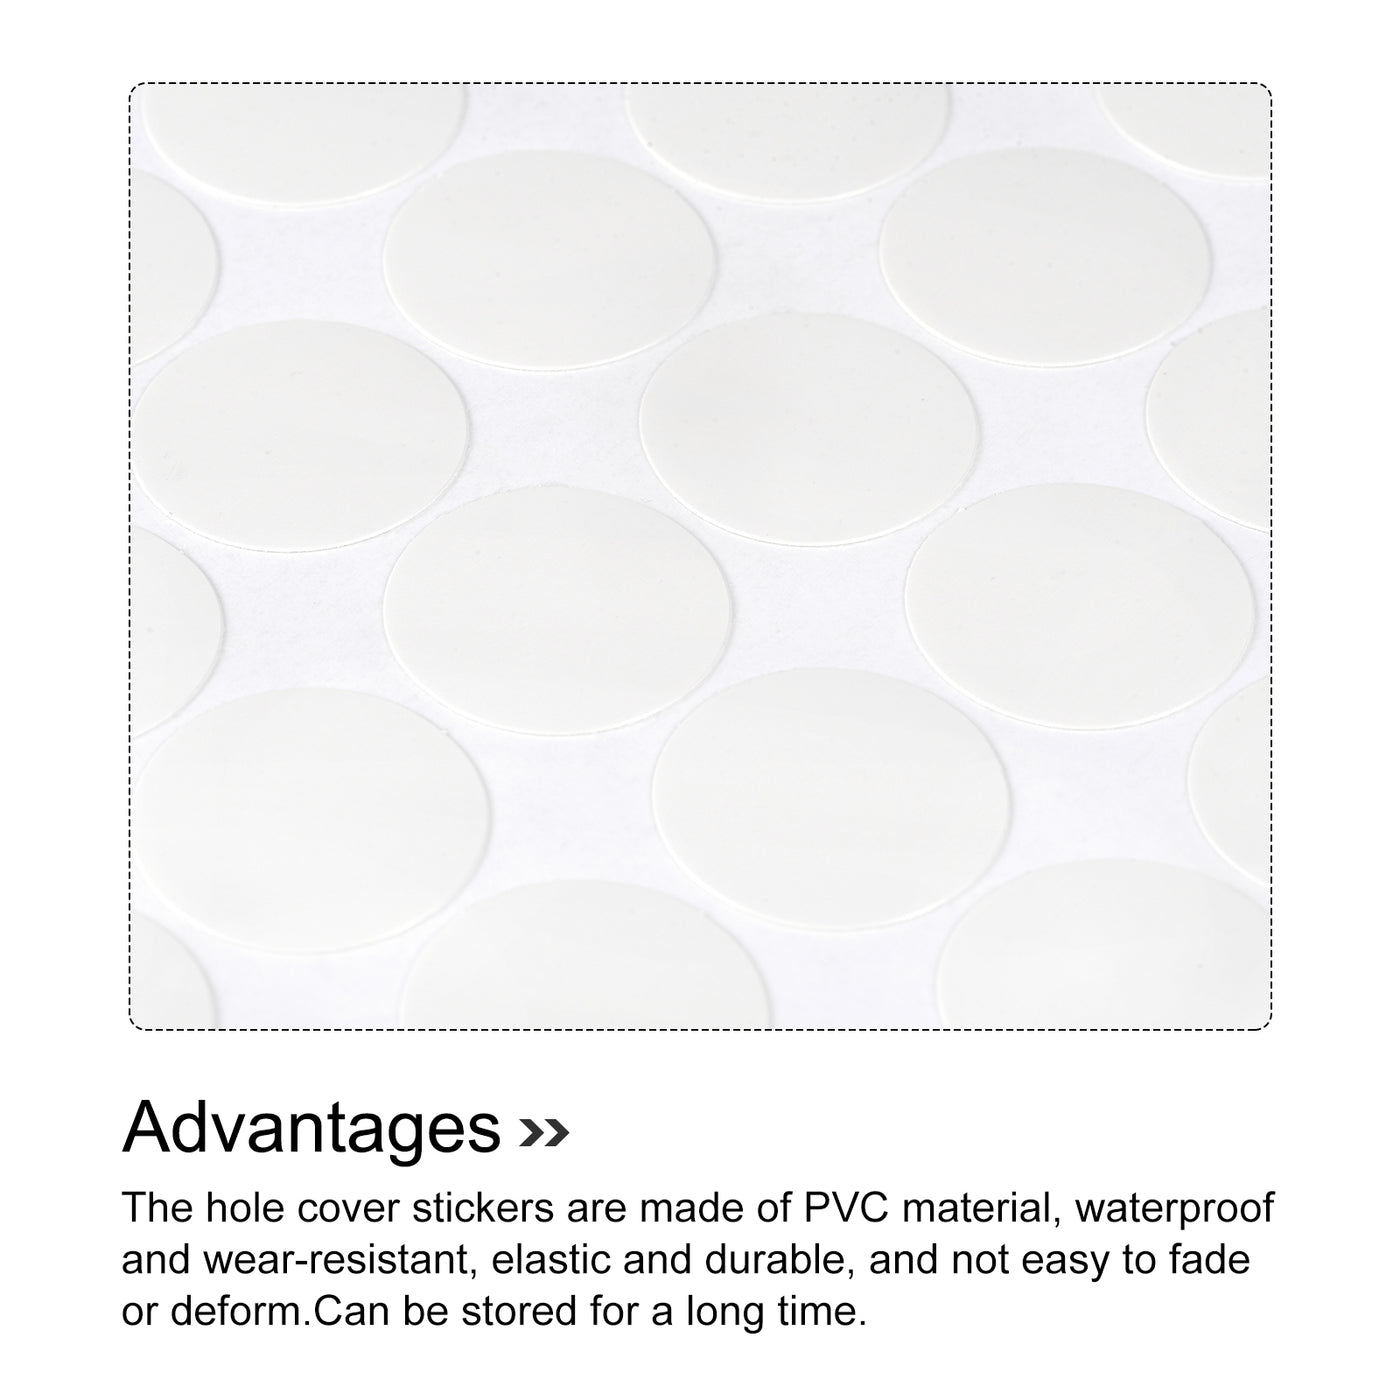 uxcell Uxcell Screw Hole Cover Stickers, 12mm Dia PVC Self Adhesive Covers Caps for Wood Furniture Cabinet Shelf Wardrobe, White 4 Sheet/560pcs